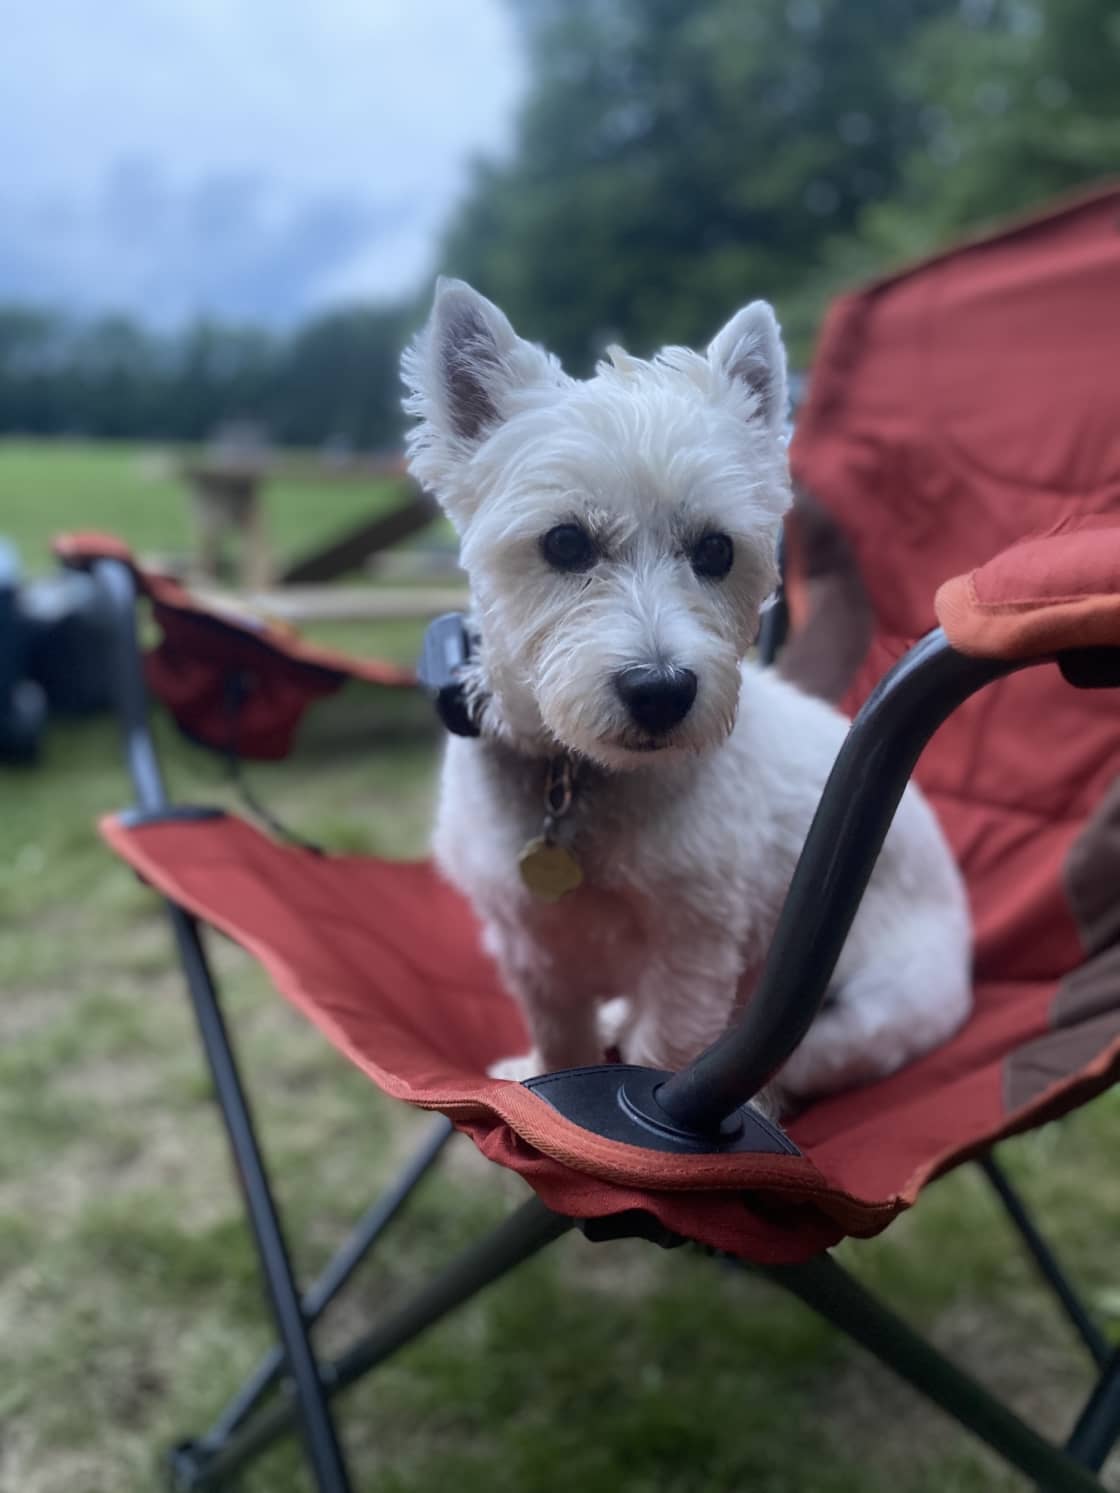 One of our four legged campers.